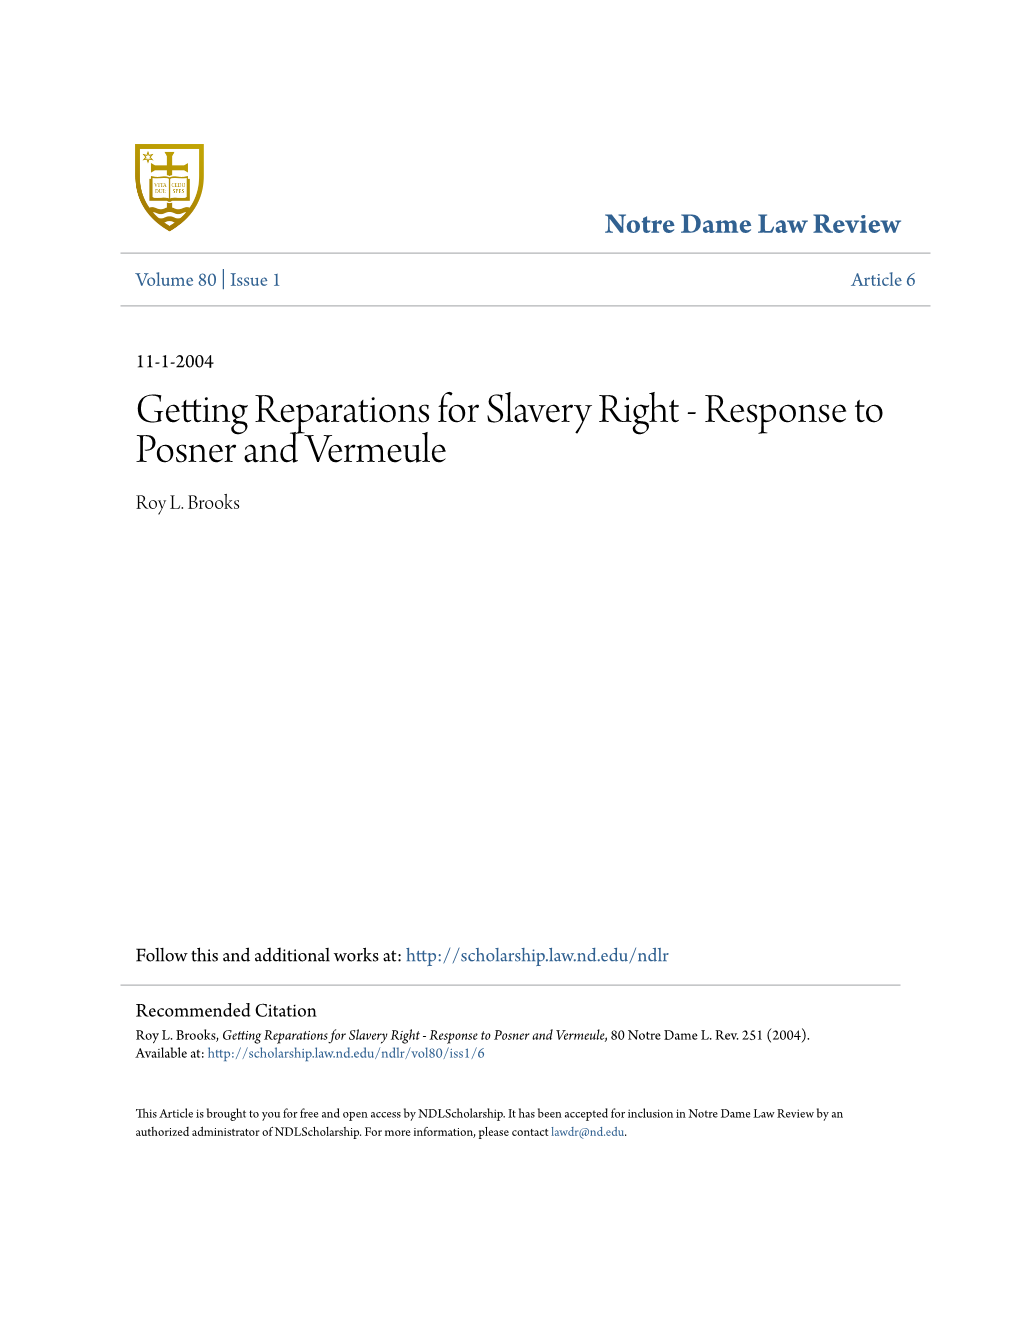 Getting Reparations for Slavery Right - Response to Posner and Vermeule Roy L